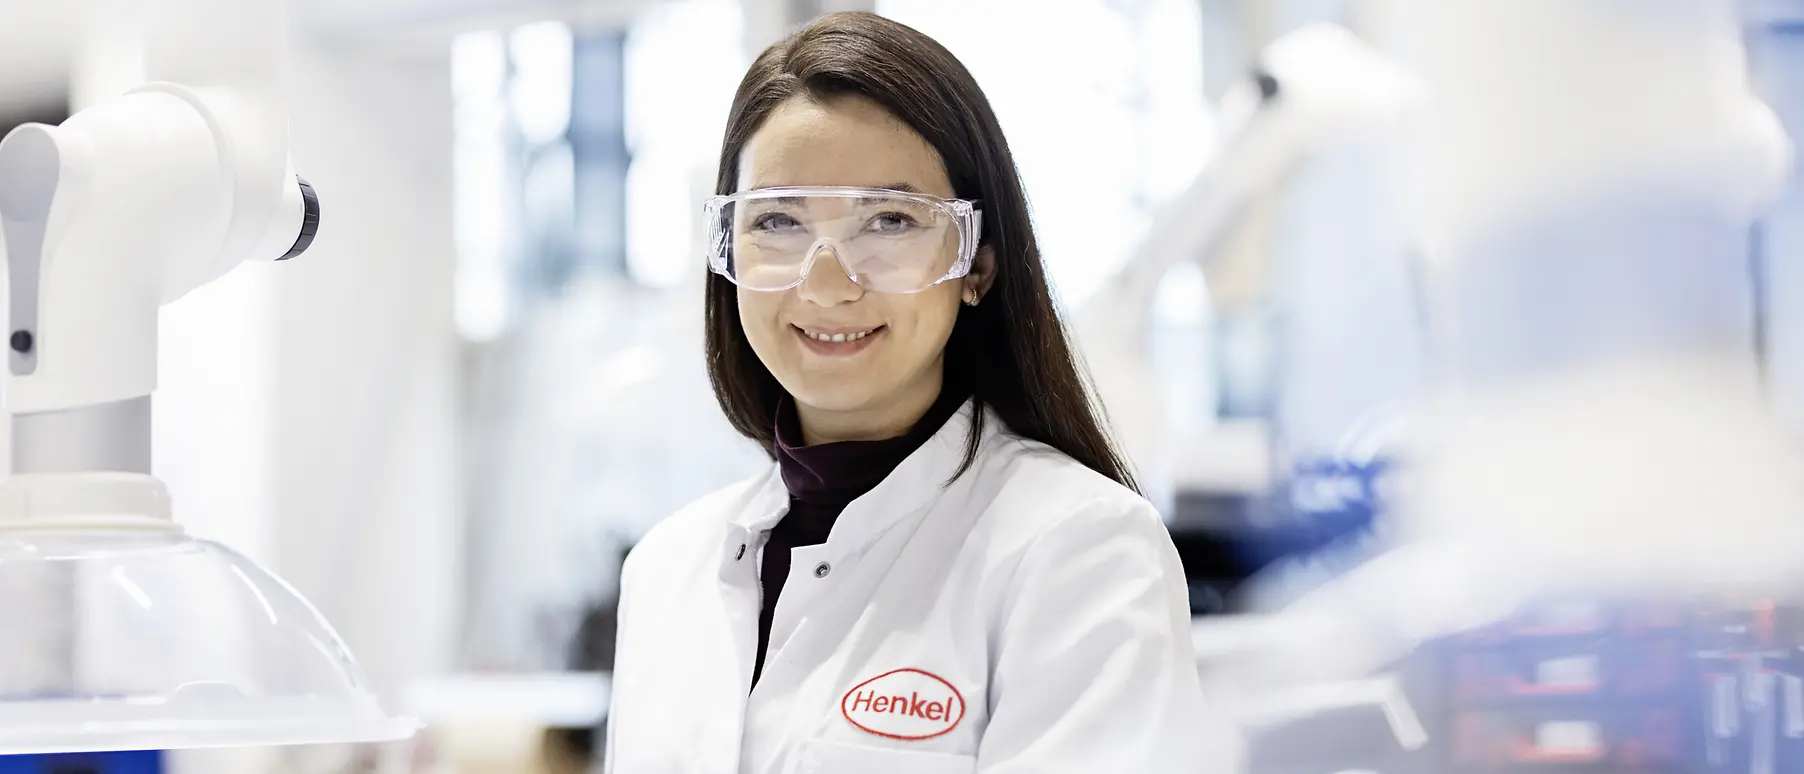 Celebrating International Day of Women and Girls in Science at Henkel